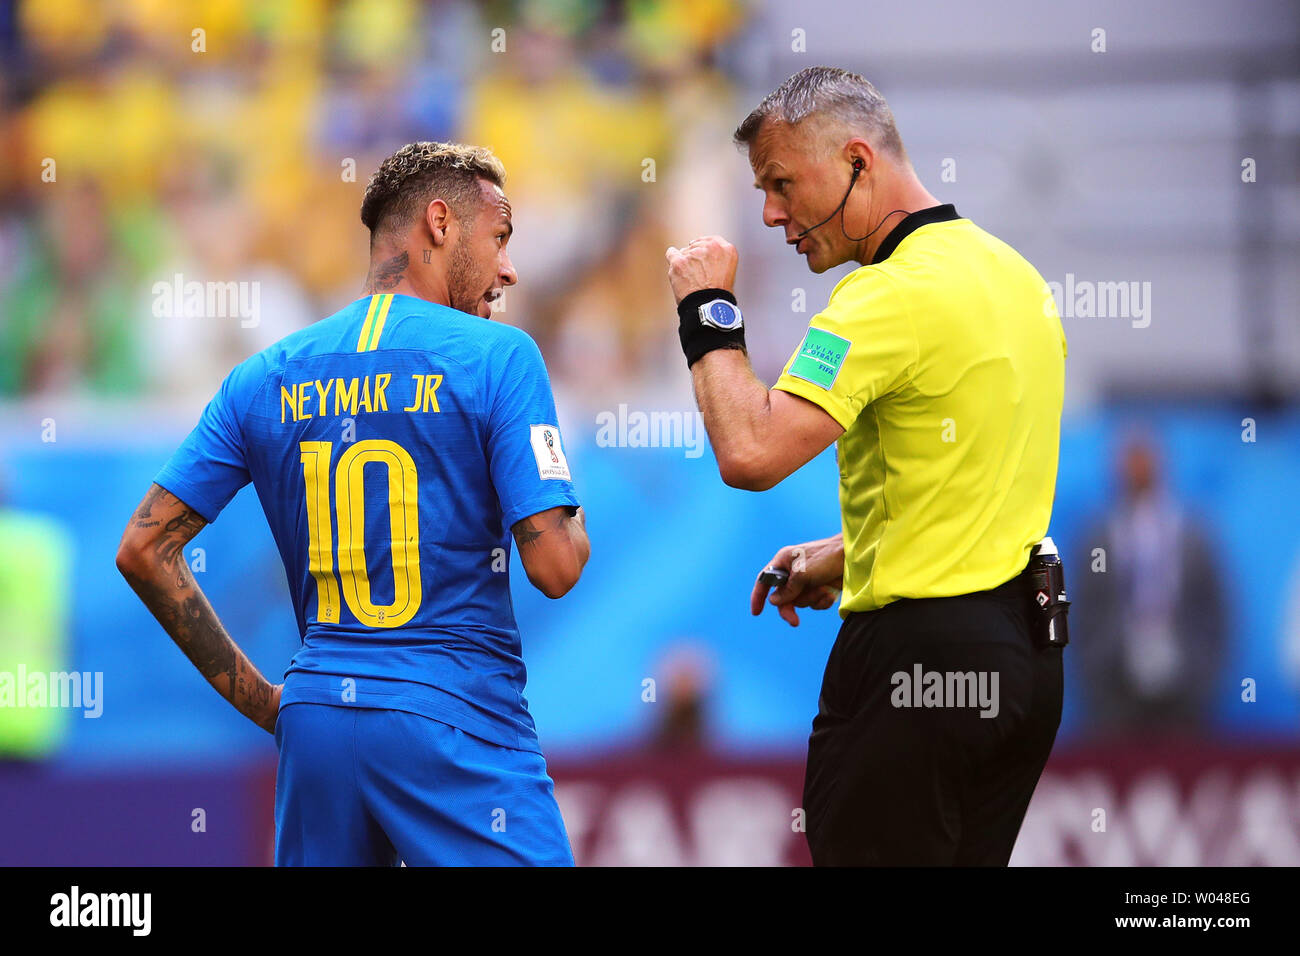 Neymar Of Brazil Is Spoken To By Referee Bjorn Kuipers During The 2018 Fifa World Cup Group E Match At The Saint Petersburg Stadium In Saint Petersburg Russia On June 22 2018